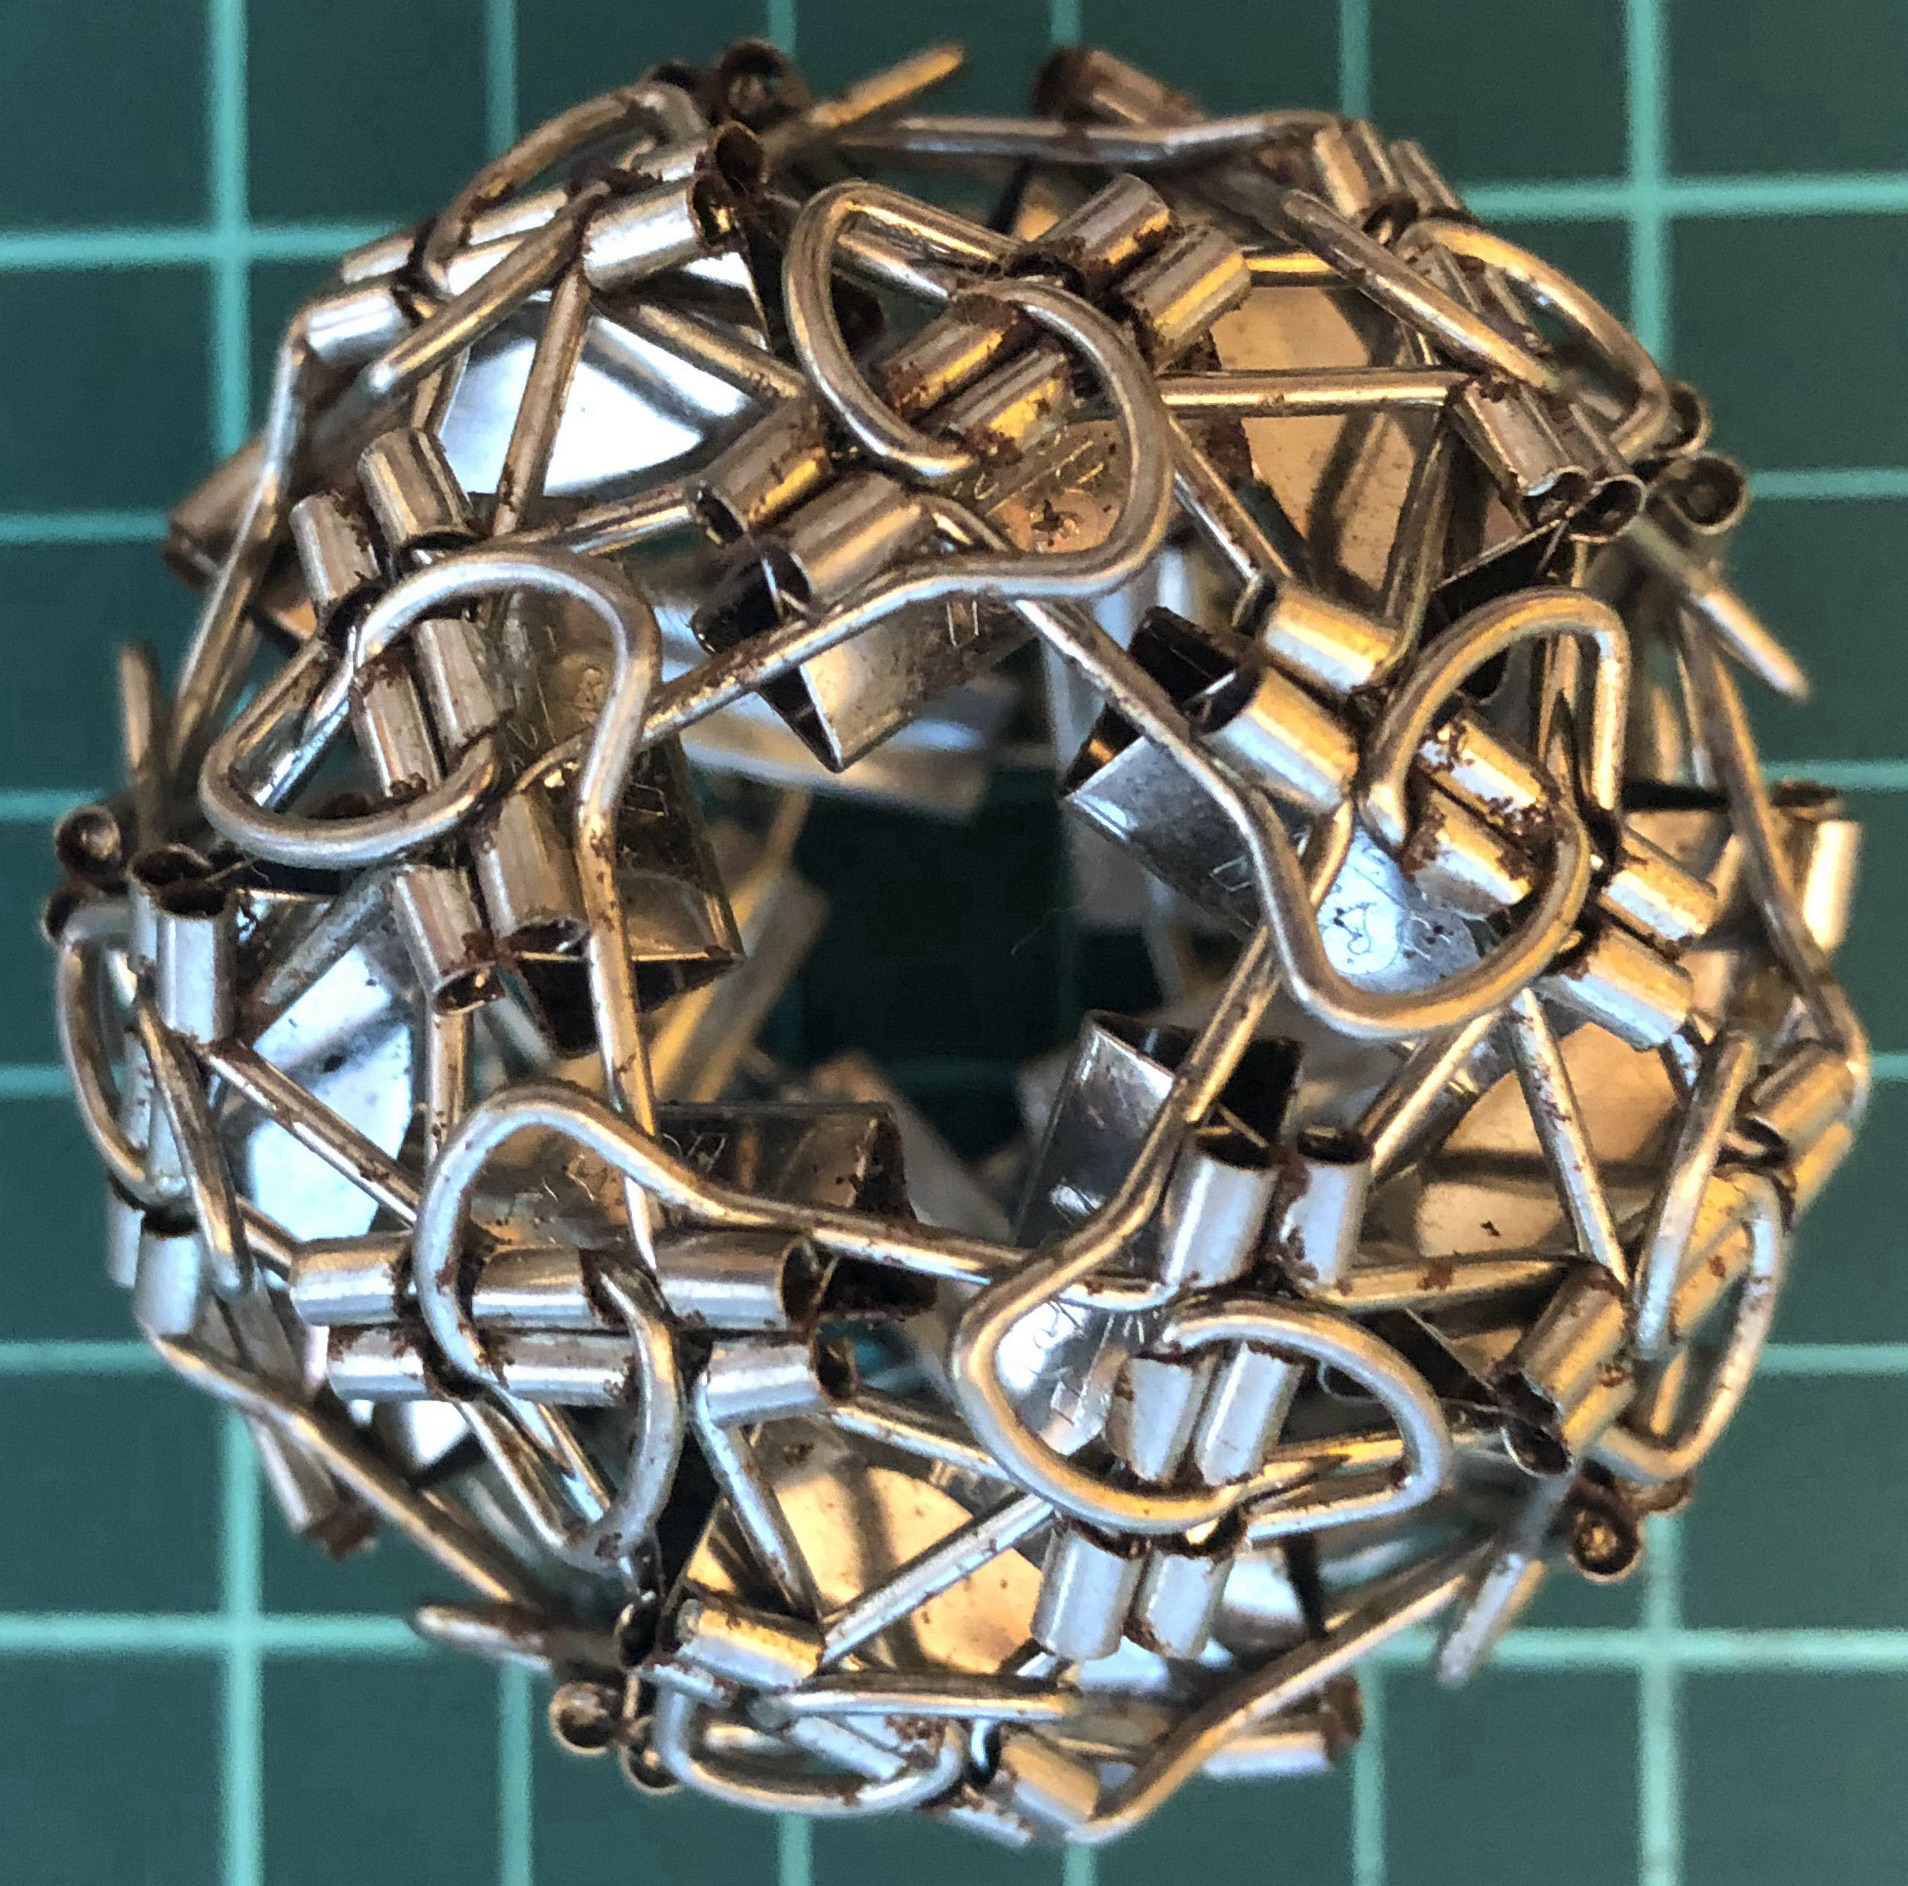 30 clips forming icosidodecahedron